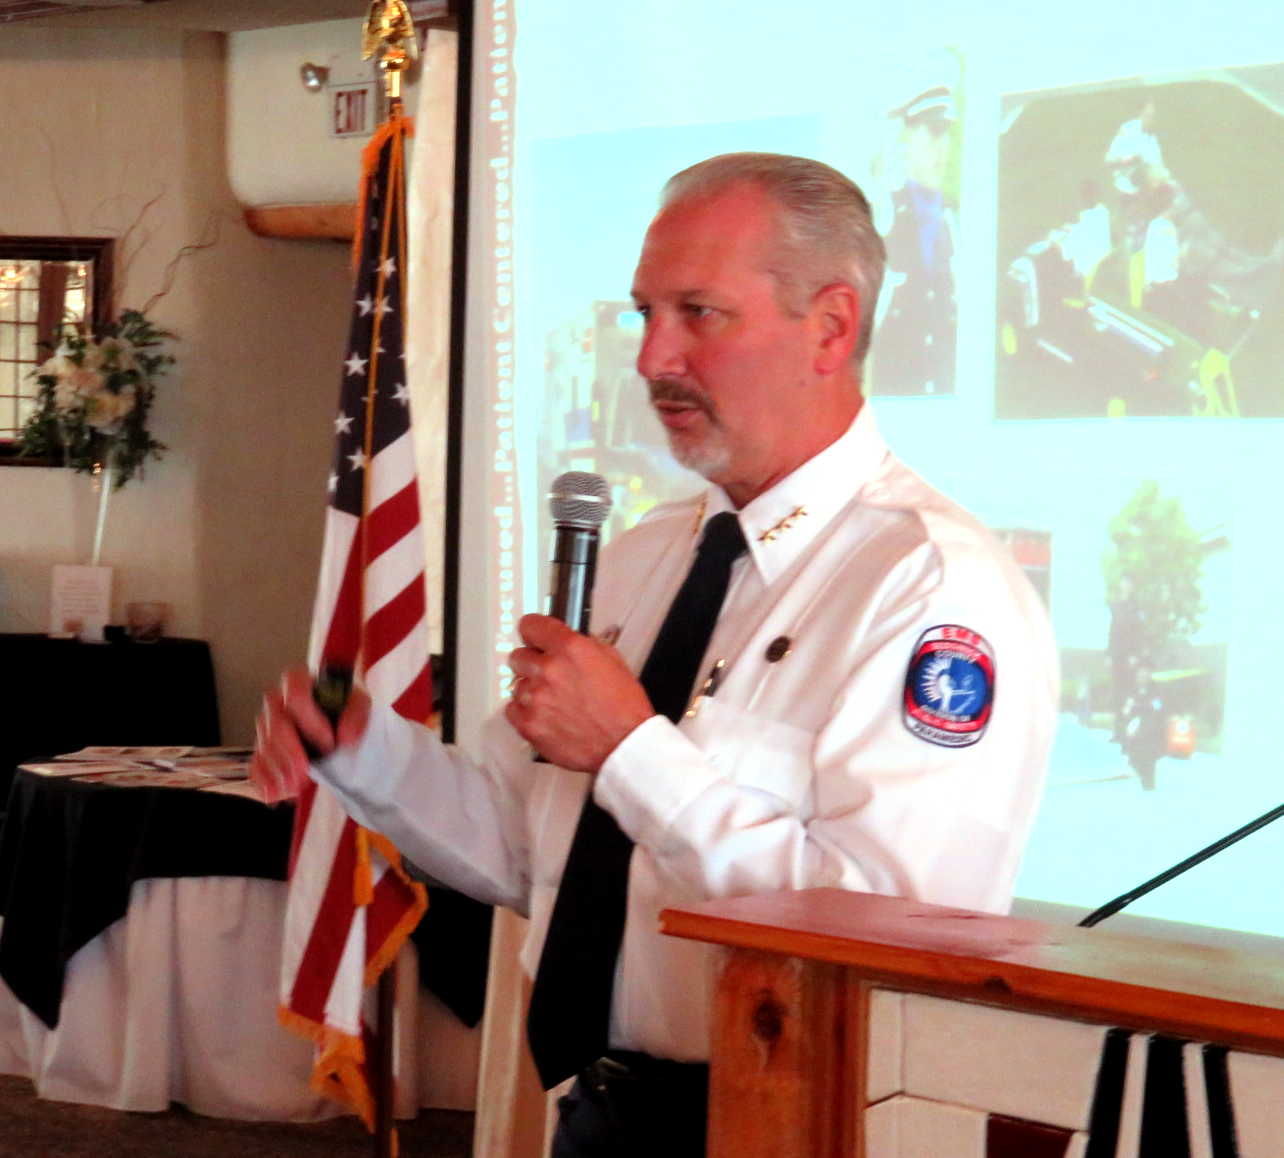 From Pachyderm: Sedgwick County EMS Director Scott Hadley